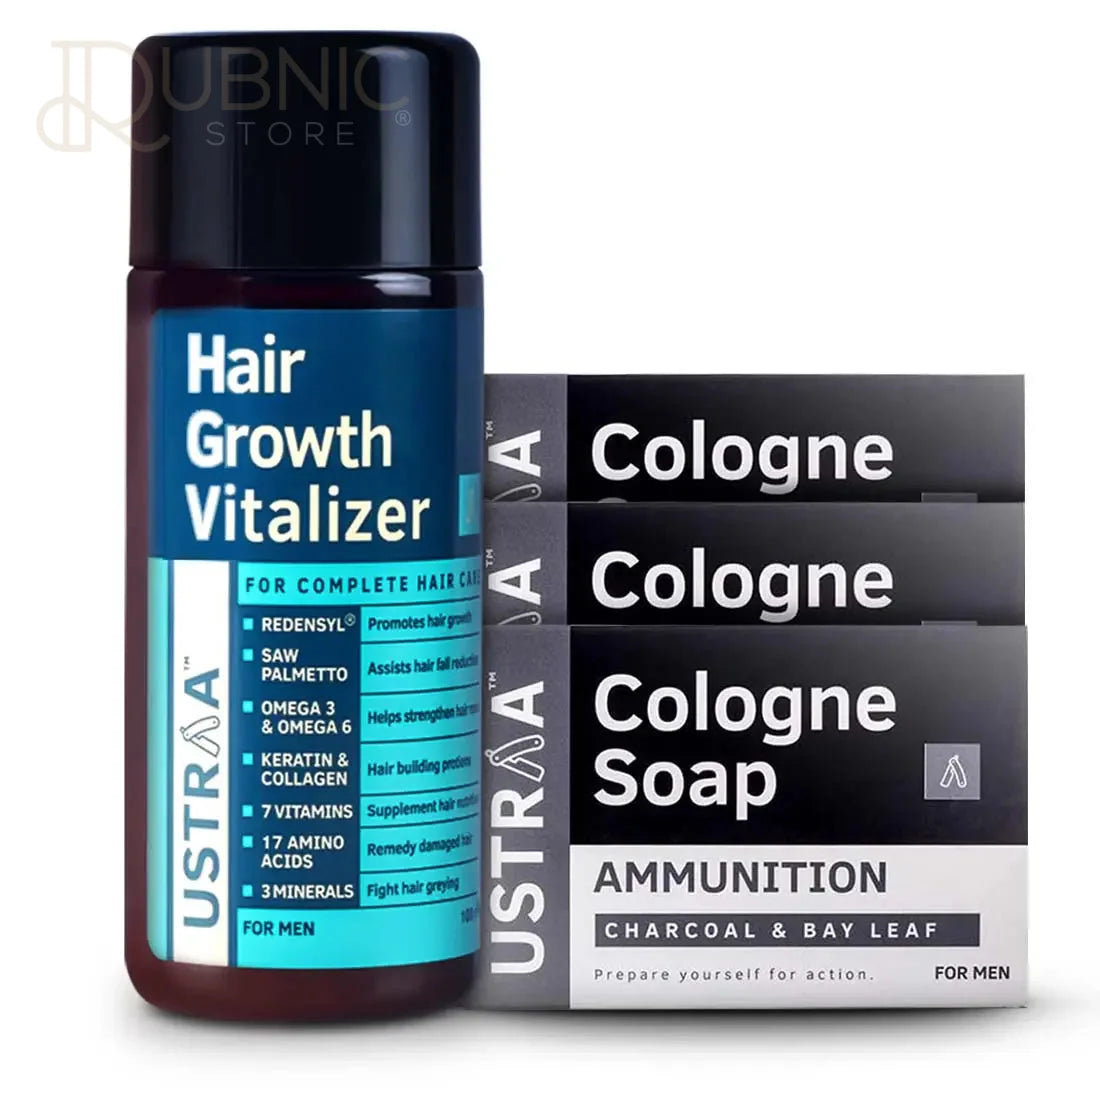 USTRAA Hair Growth Vitalizer - 100ml & Ayurvedic Hair Oil - 200ml Price in  India, Full Specifications & Offers | DTashion.com